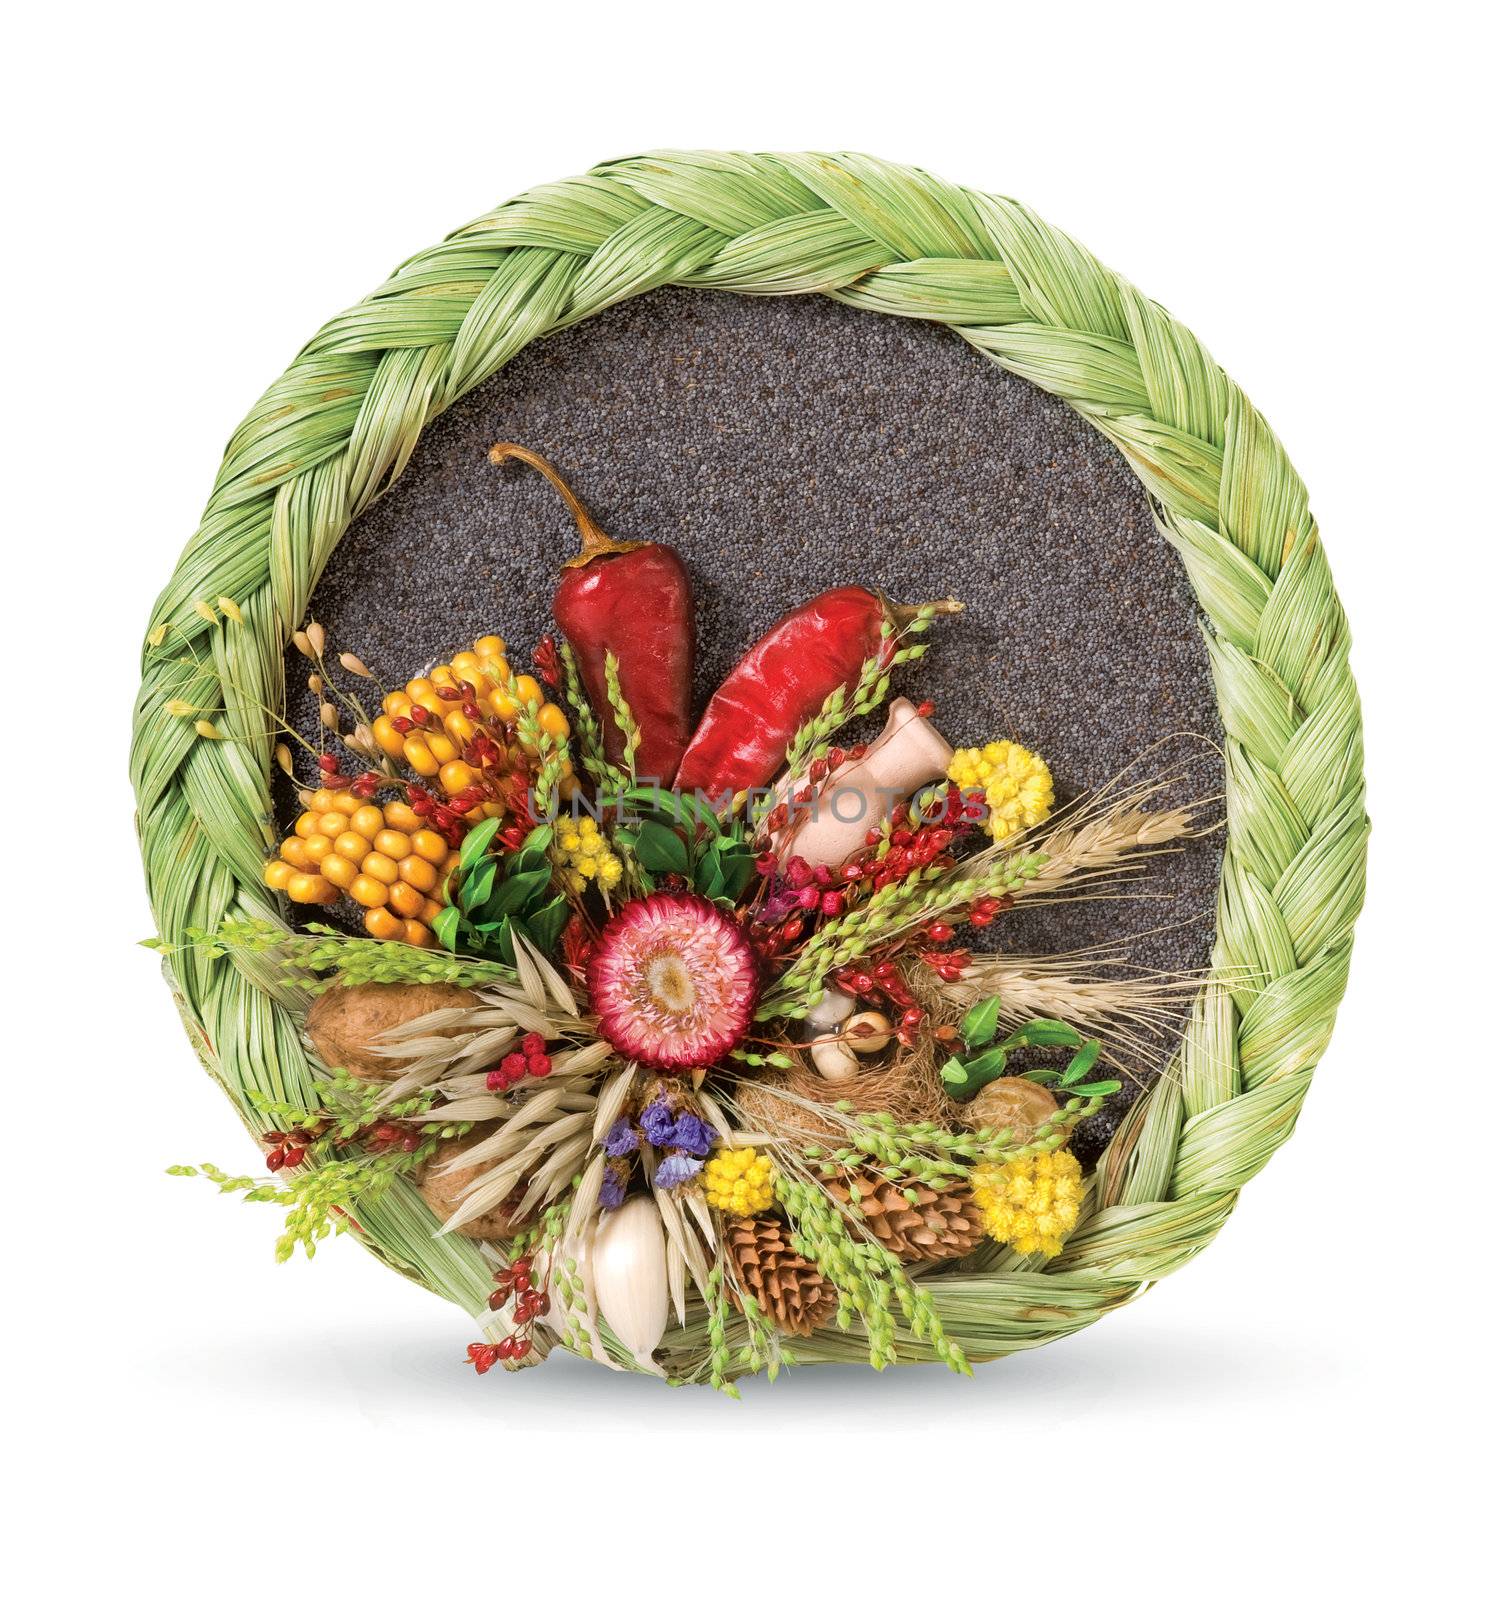 Traditional ukrainian souvenir that made of dried materials and plants. Hand-made. Isolated on white.